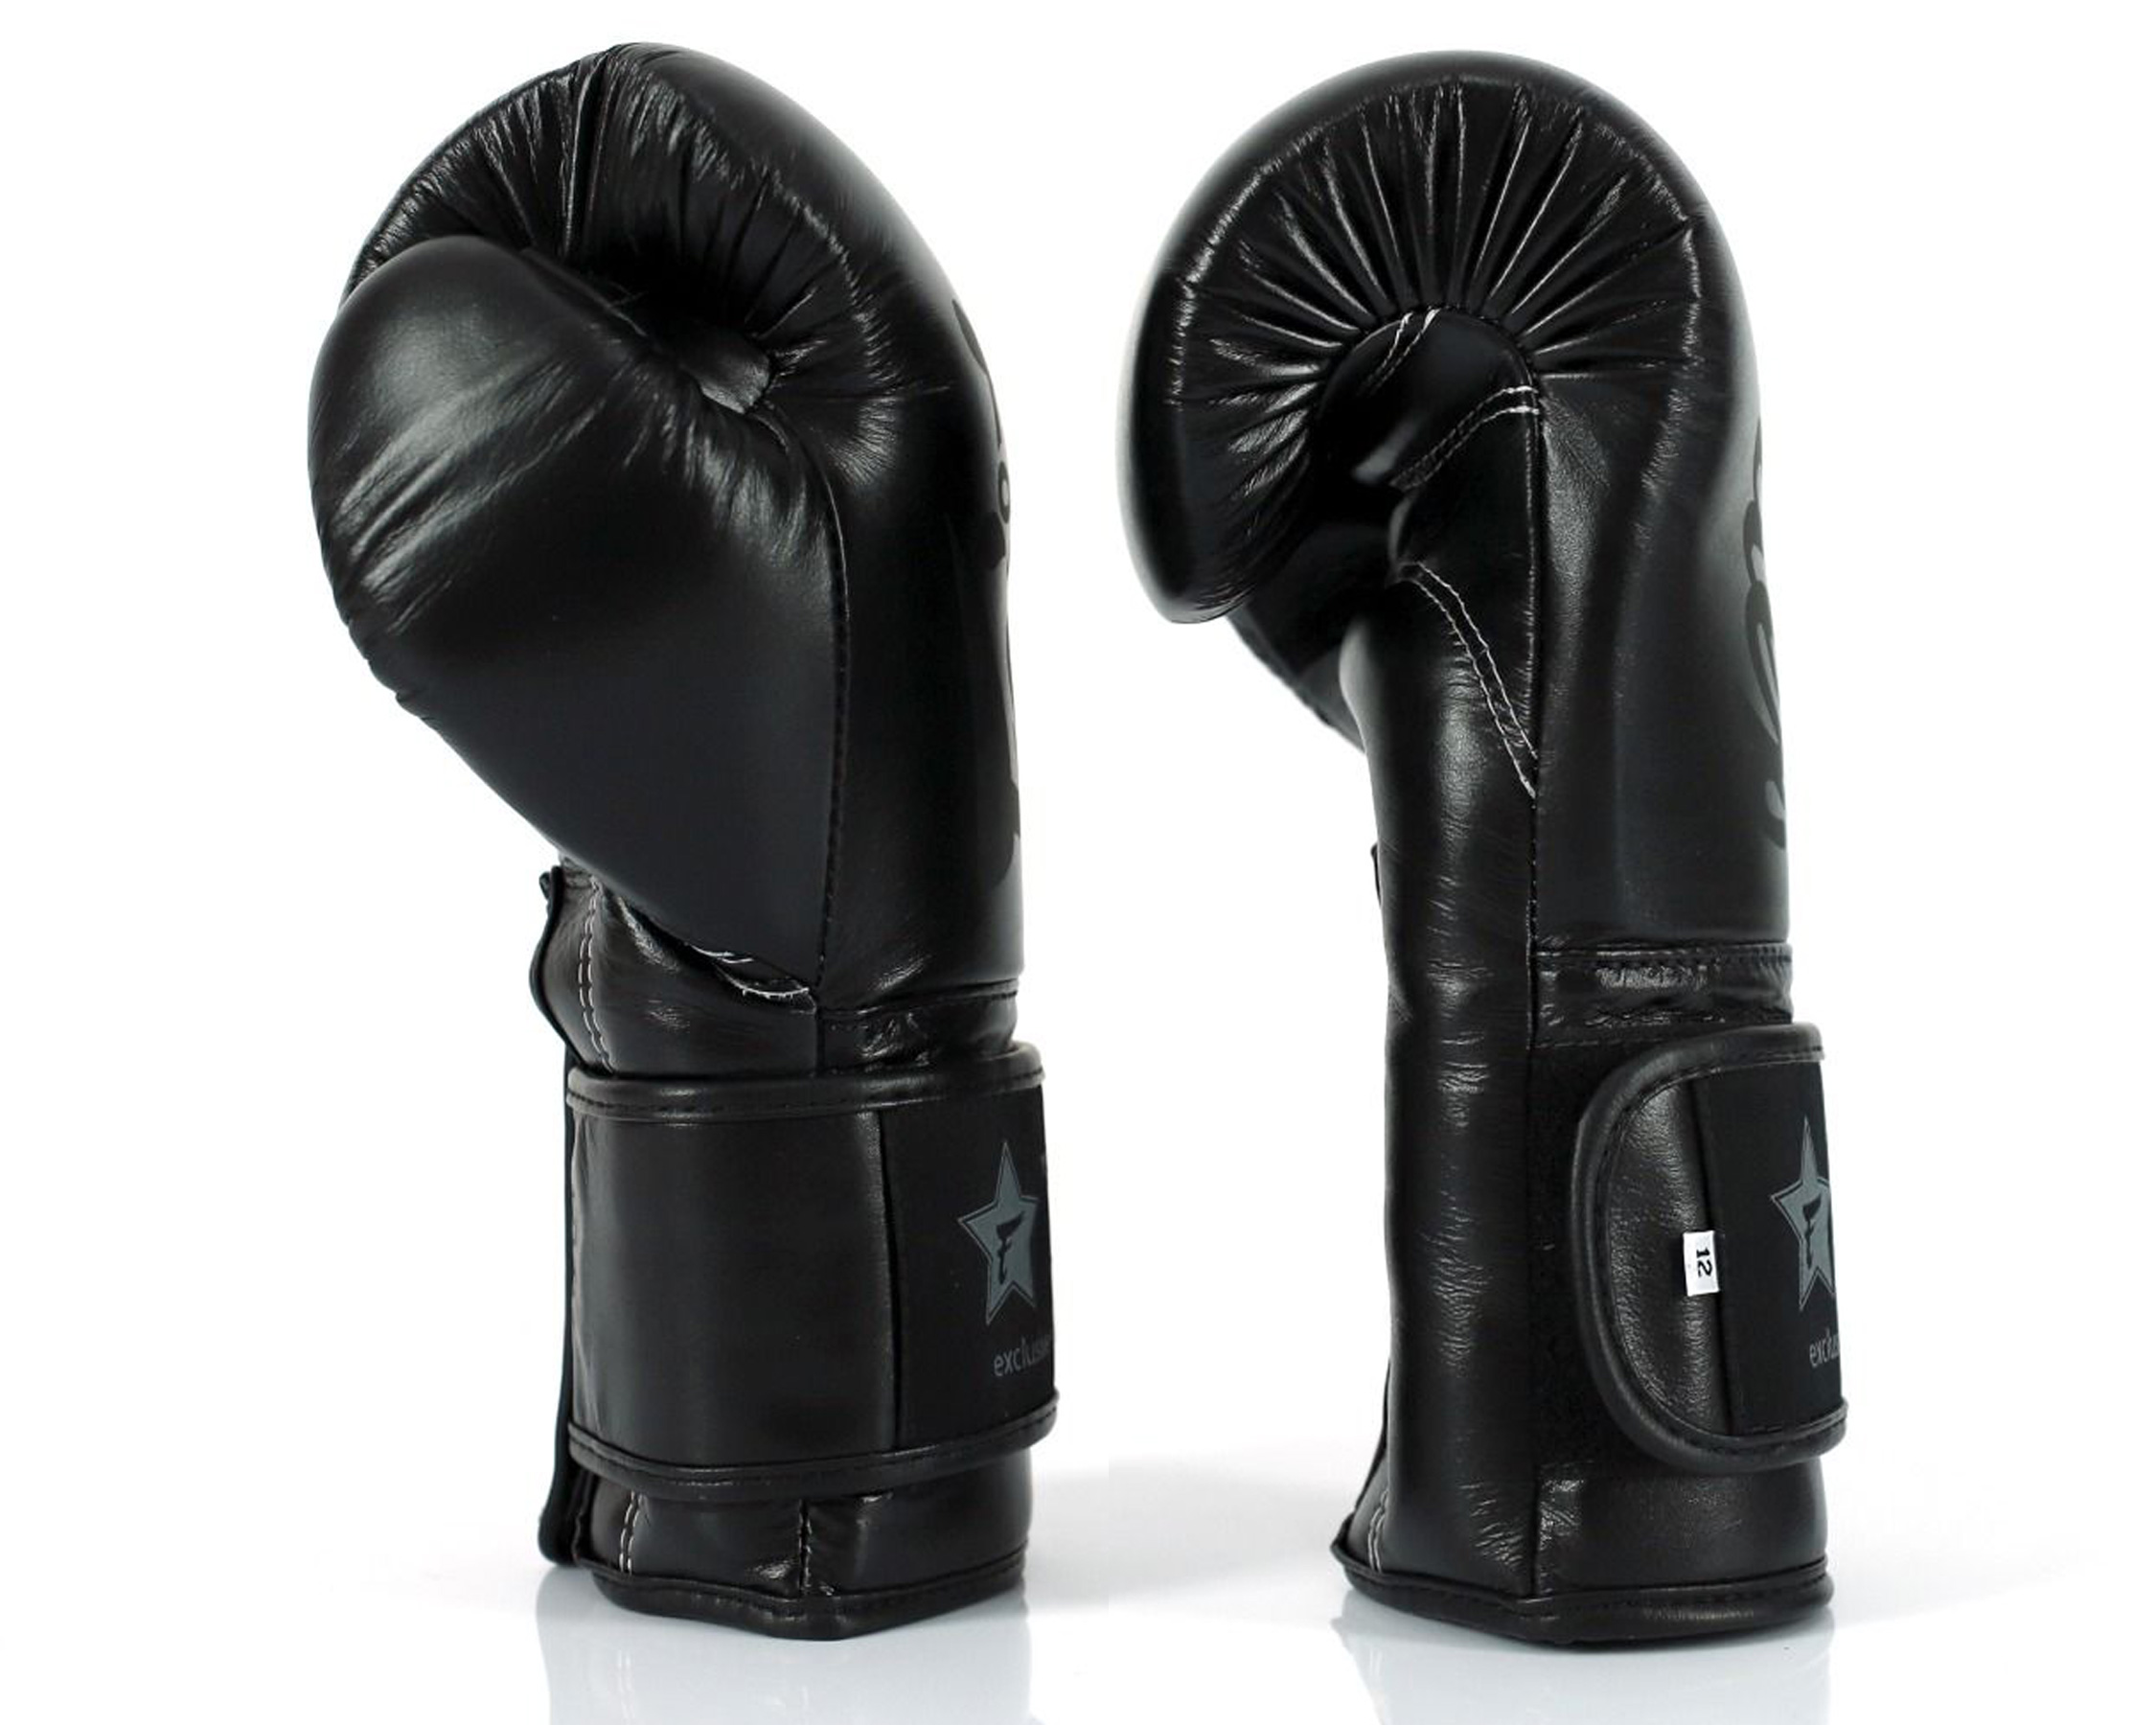 Fairtex X Booster leather boxing gloves in black/black - Boxing gloves,  training gloves and sparring gloves - Fairtex X Booster